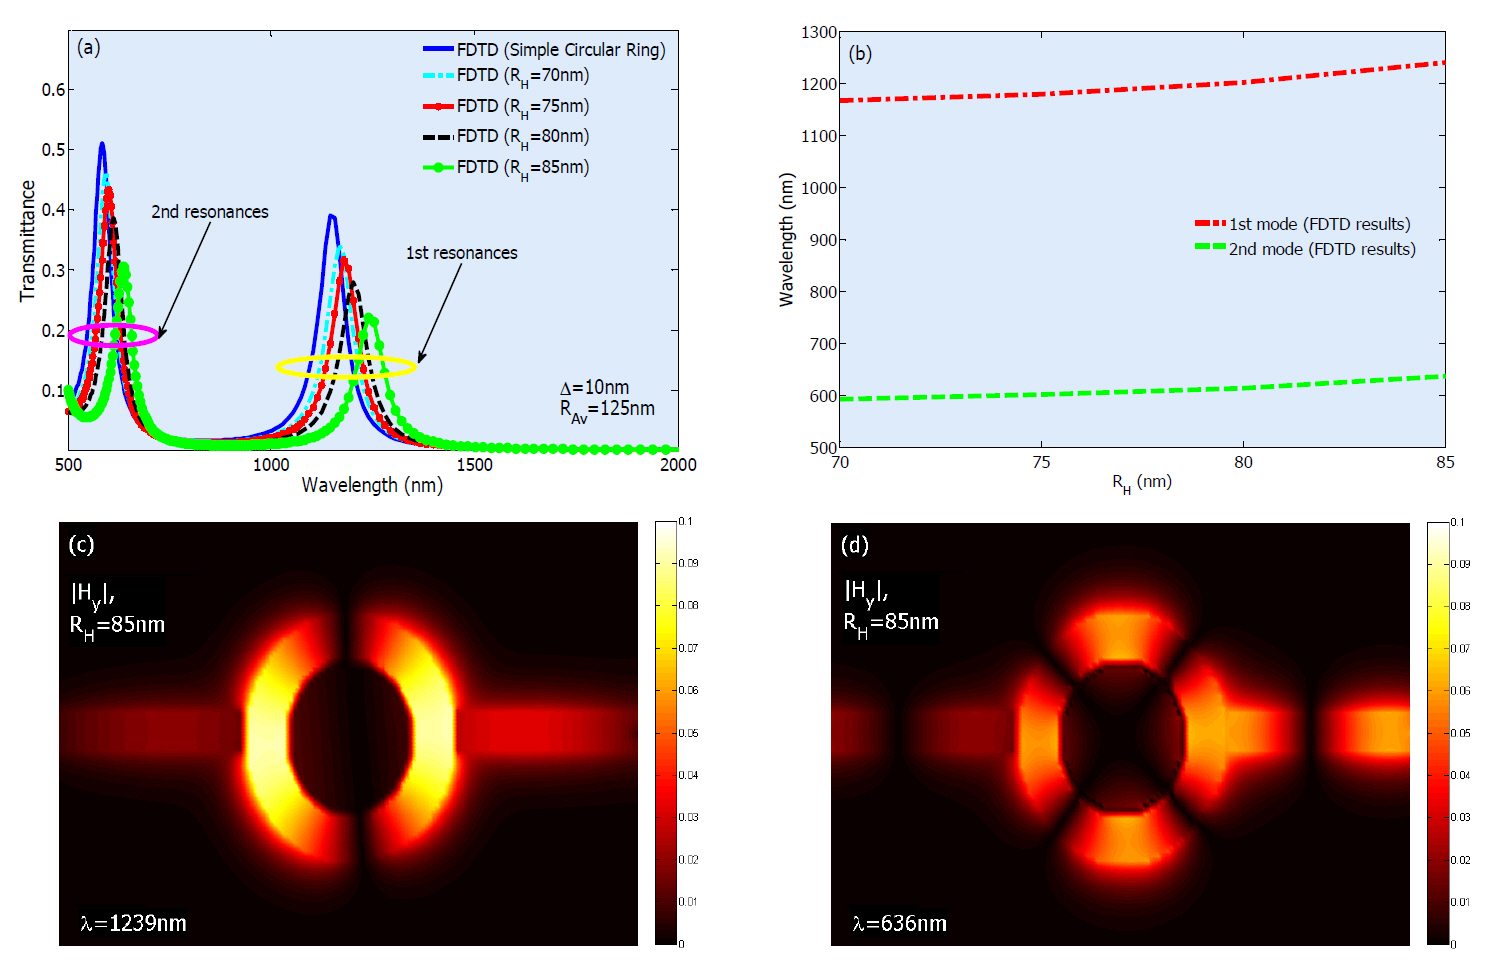 (a) Transmission spectrum of the band-pass plasmonic filter with circular hollow-core ring resonator shown in figure 5 fordifferent values of RH. (b) Relationship between resonance wavelengths and hollow radius. (c) The 'Hy' field profile of band-passplasmonic filter with circular hollow- core ring resonator at the first resonance wavelength of λ= 1239 nm for RH=85 nm. (d) The 'Hy' field pattern of the filter at the second resonance wavelength of λ=636 nm for RH= 85 nm.